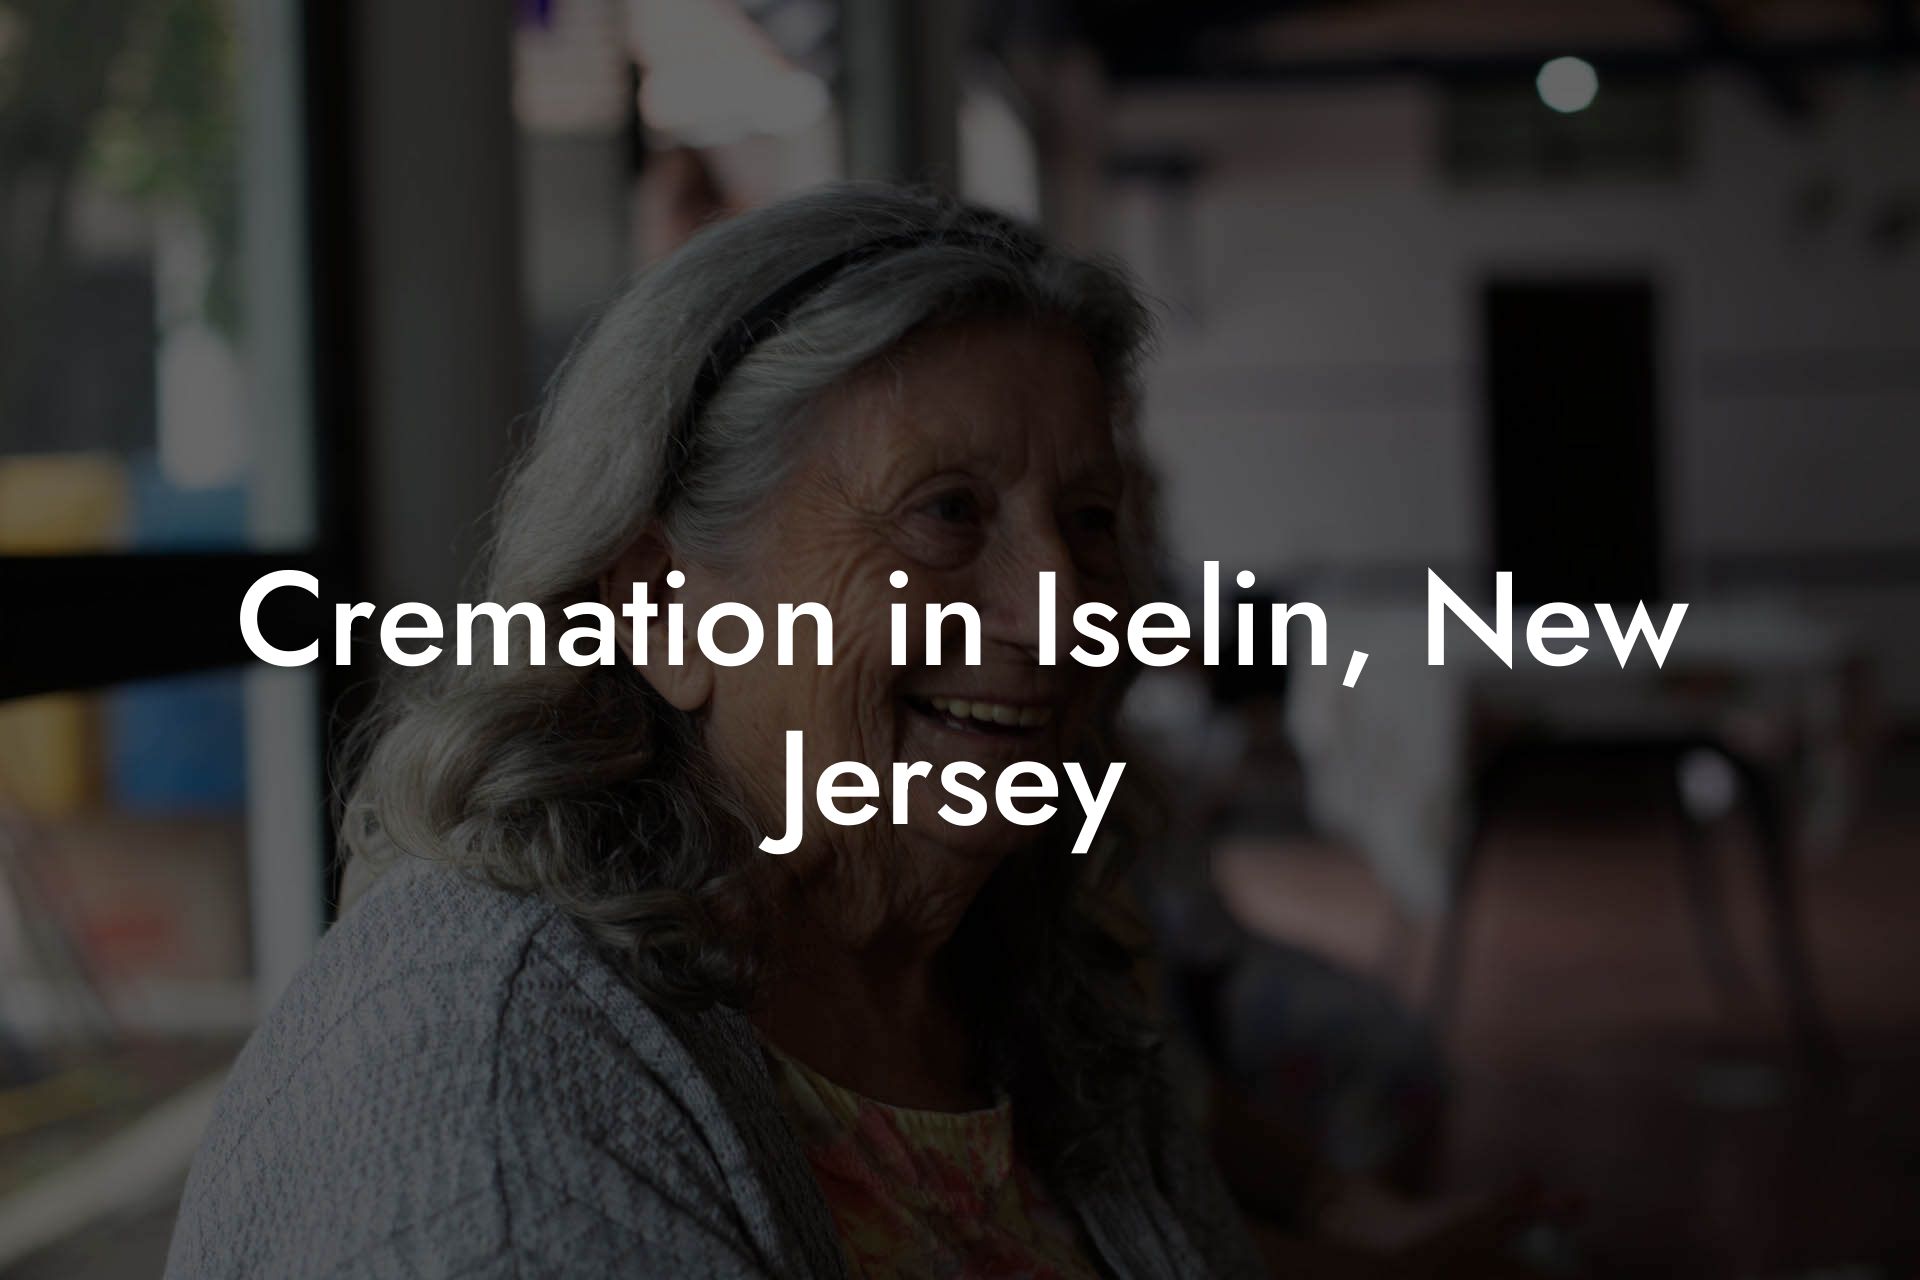 Cremation in Iselin, New Jersey